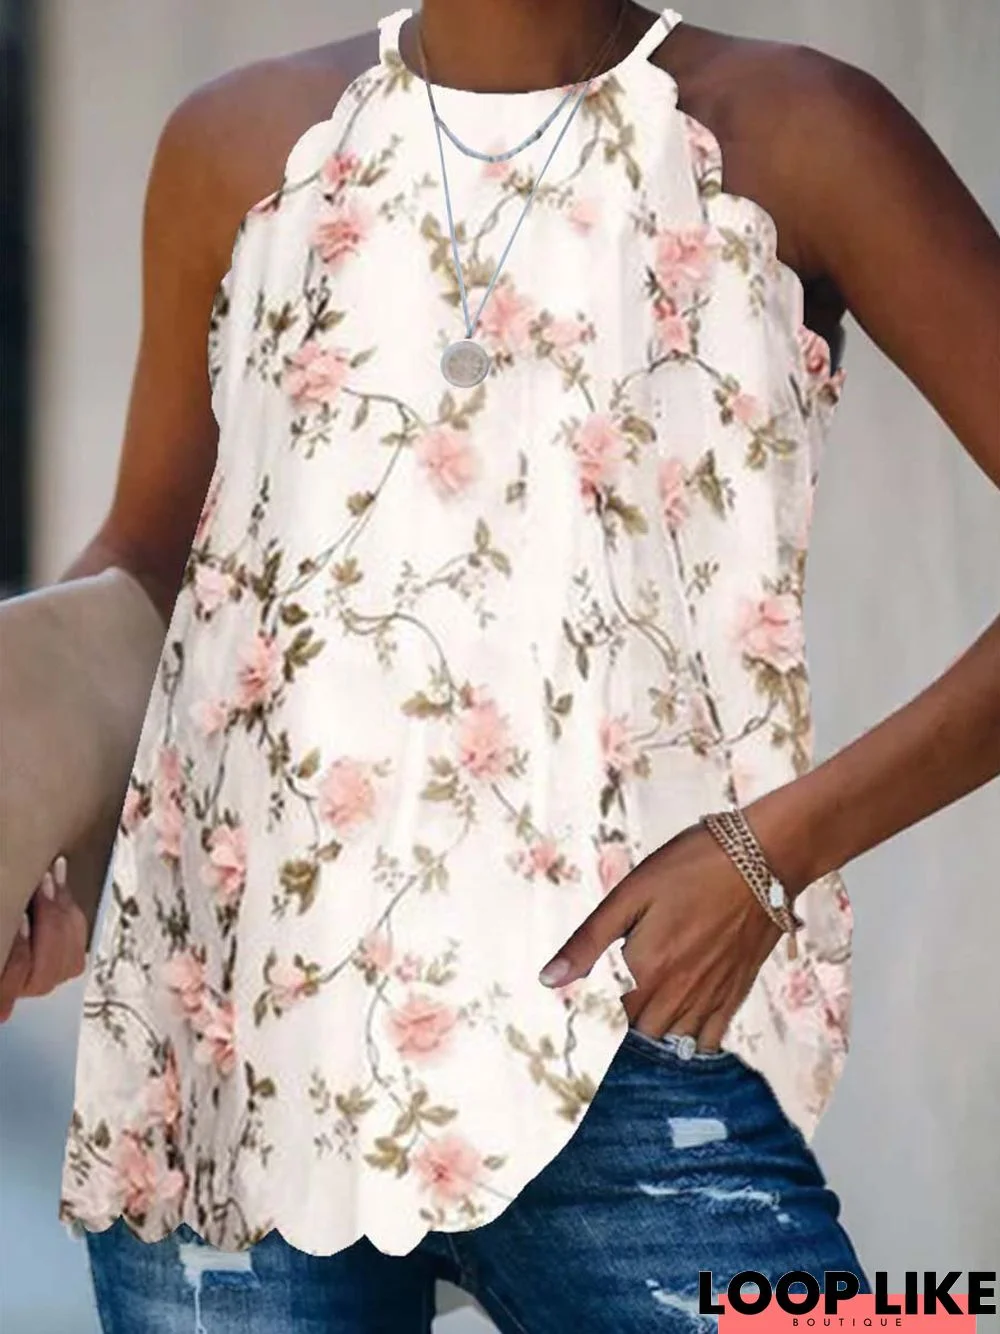 Floral  Sleeveless  Printed  Polyester  HalterOff Shoulder Cold Shoulder  Sexy  Summer  Beige Tunic Top